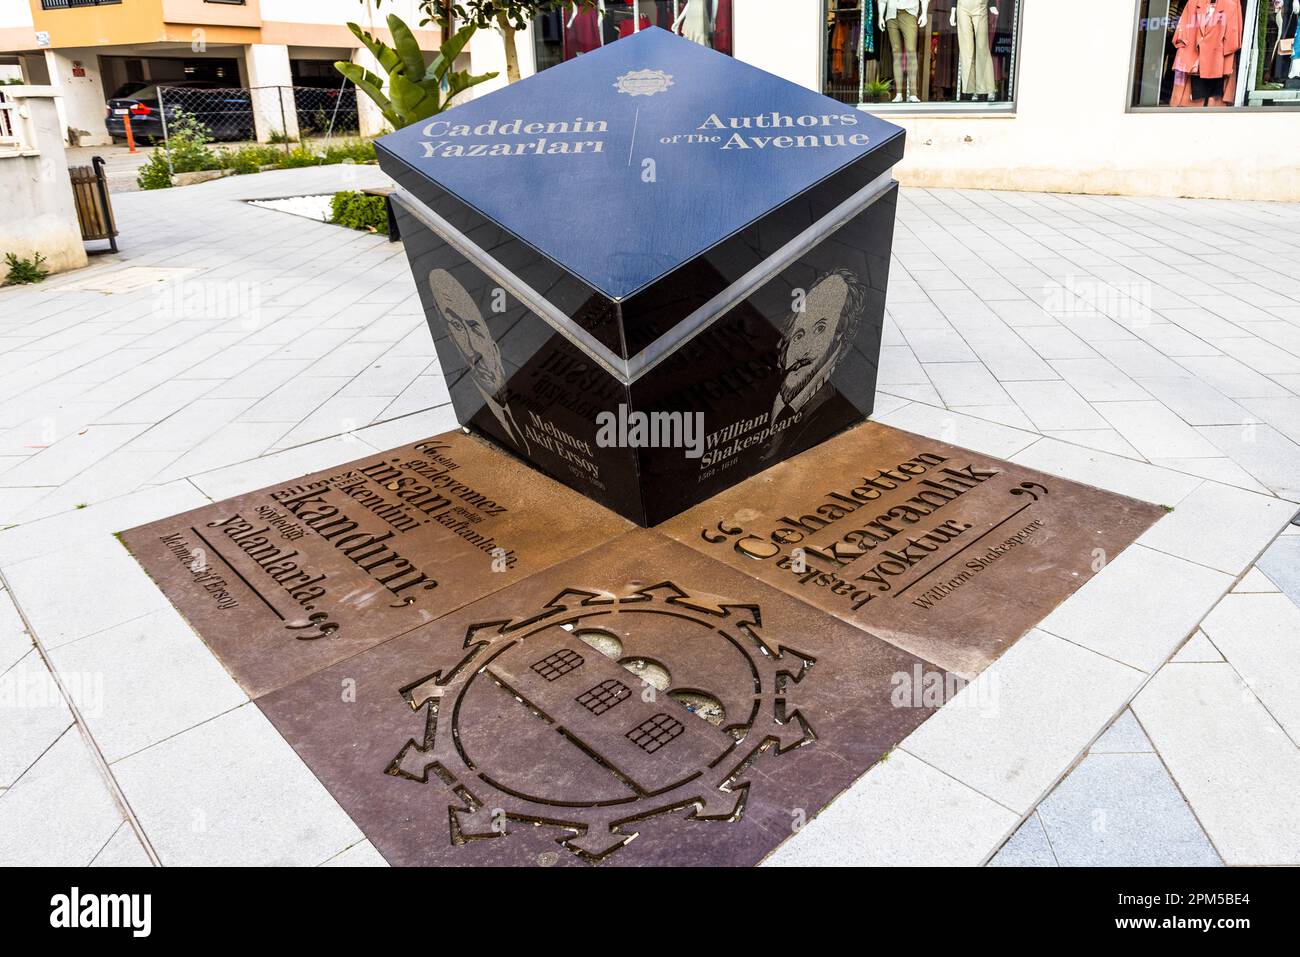 Monument to William Shakespeare and Mehmet Akif Ersoy in Nicosia, Cyprus Stock Photo